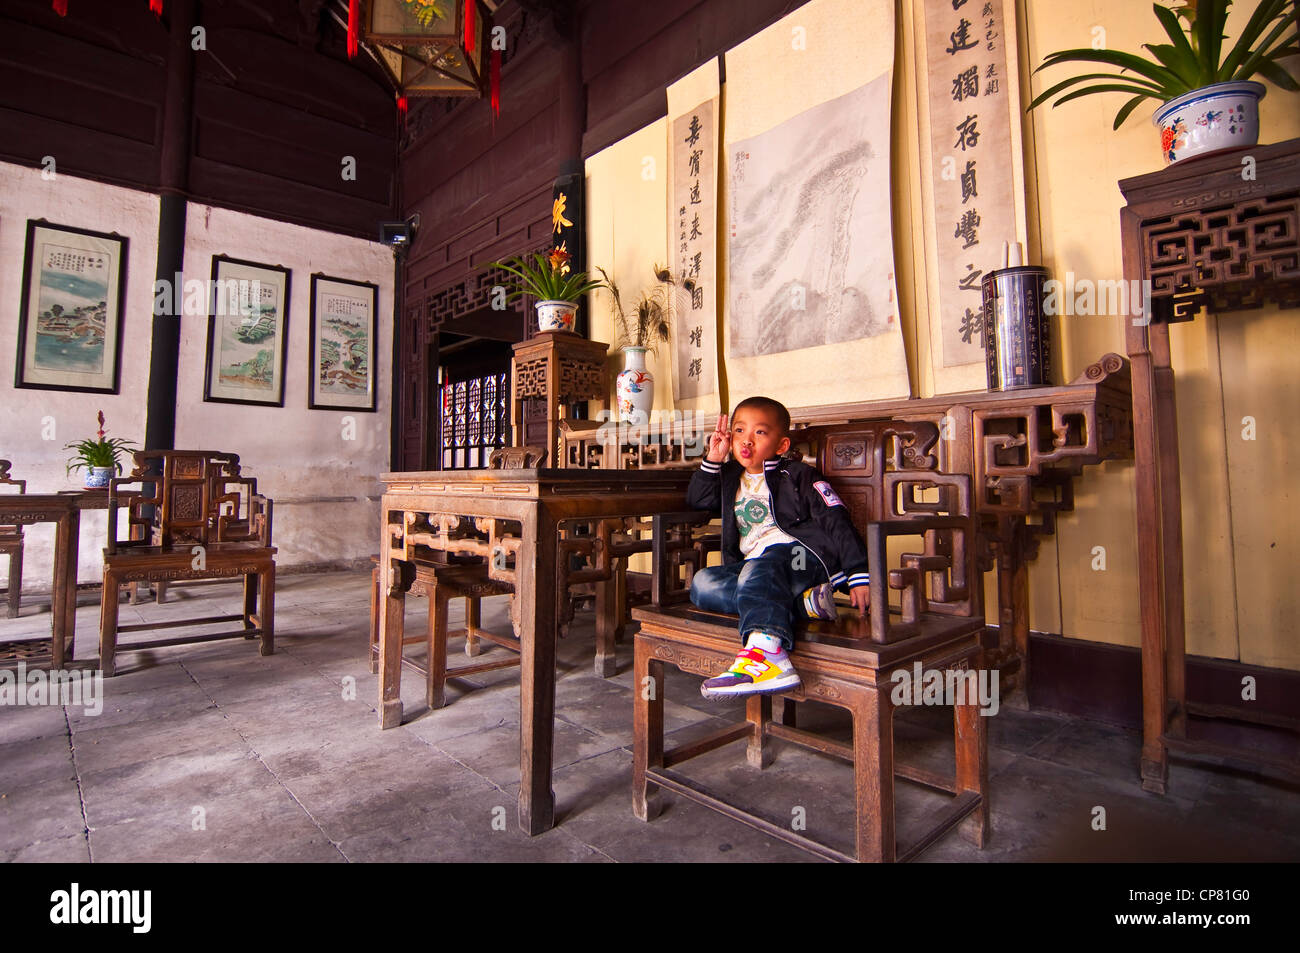 Chinese boy sitting on a beautiful wooden chair in a old house - Zhouzhuang watertown near Shanghai - China Stock Photo